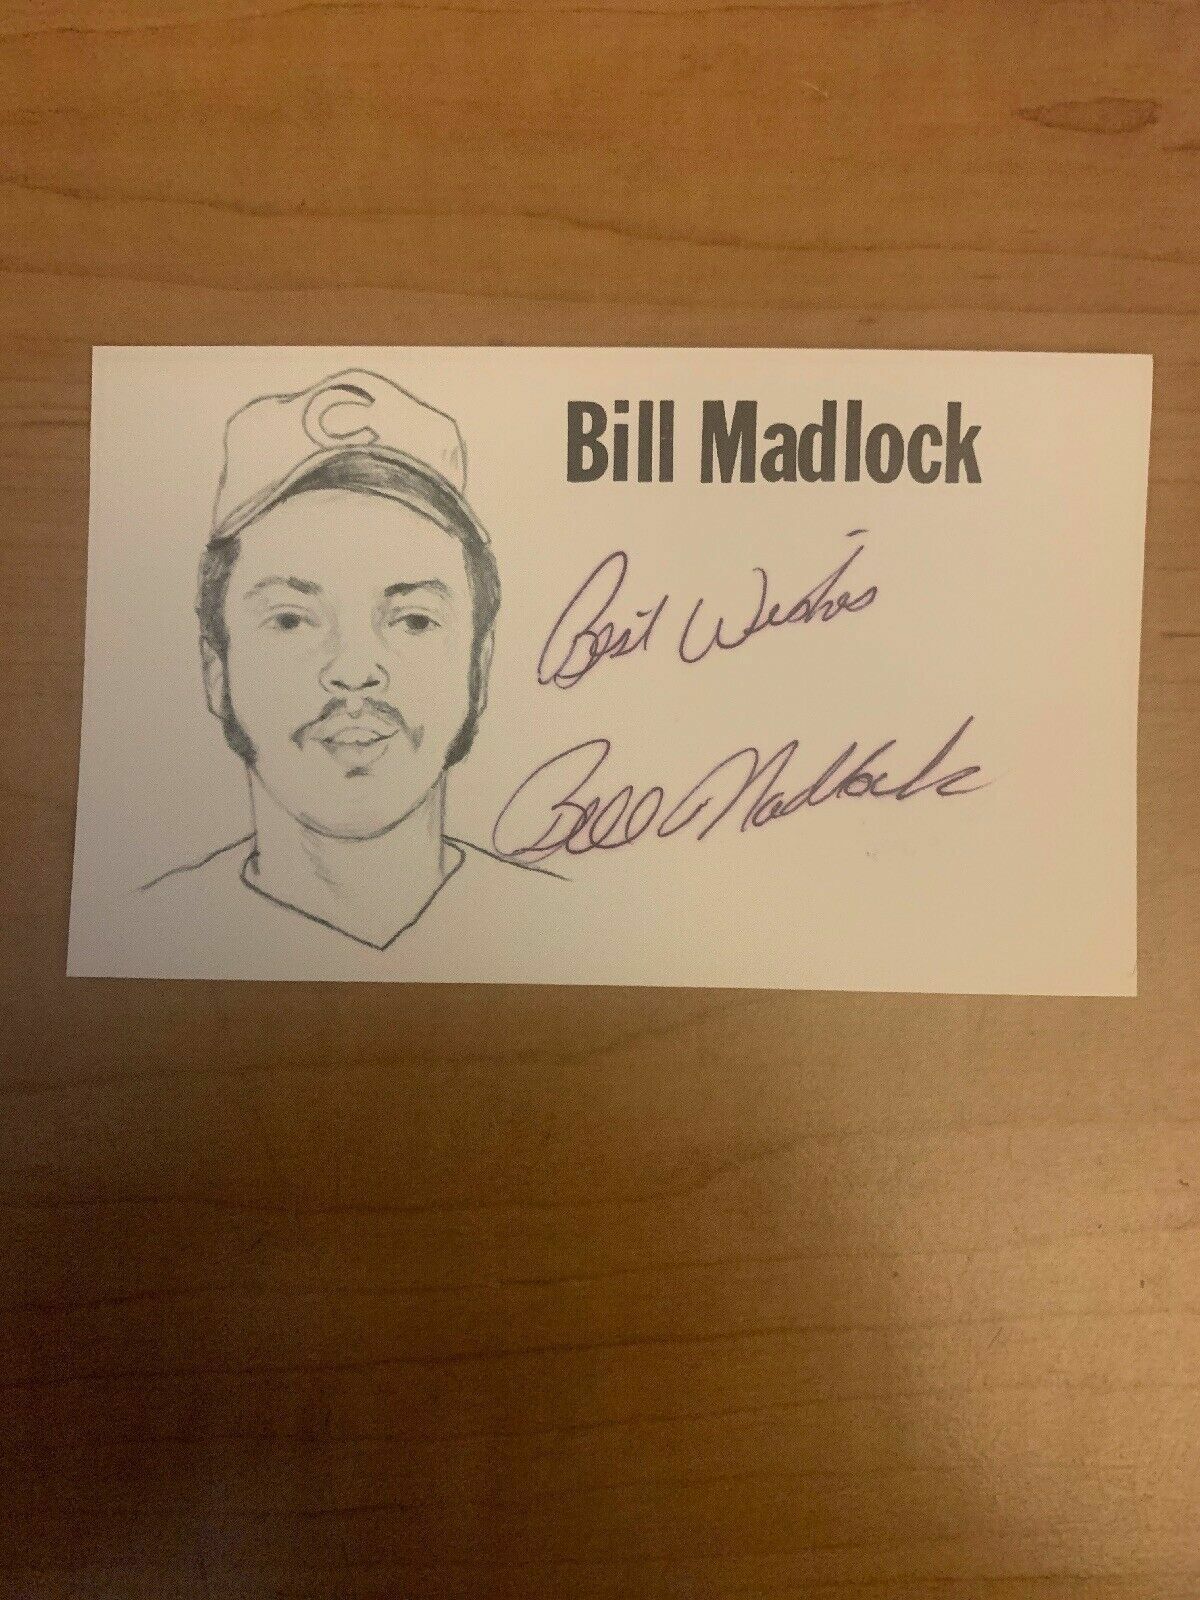 BILL MADLOCK - BASEBALL - AUTOGRAPH SIGNED - INDEX CARD - AUTHENTIC- B6459